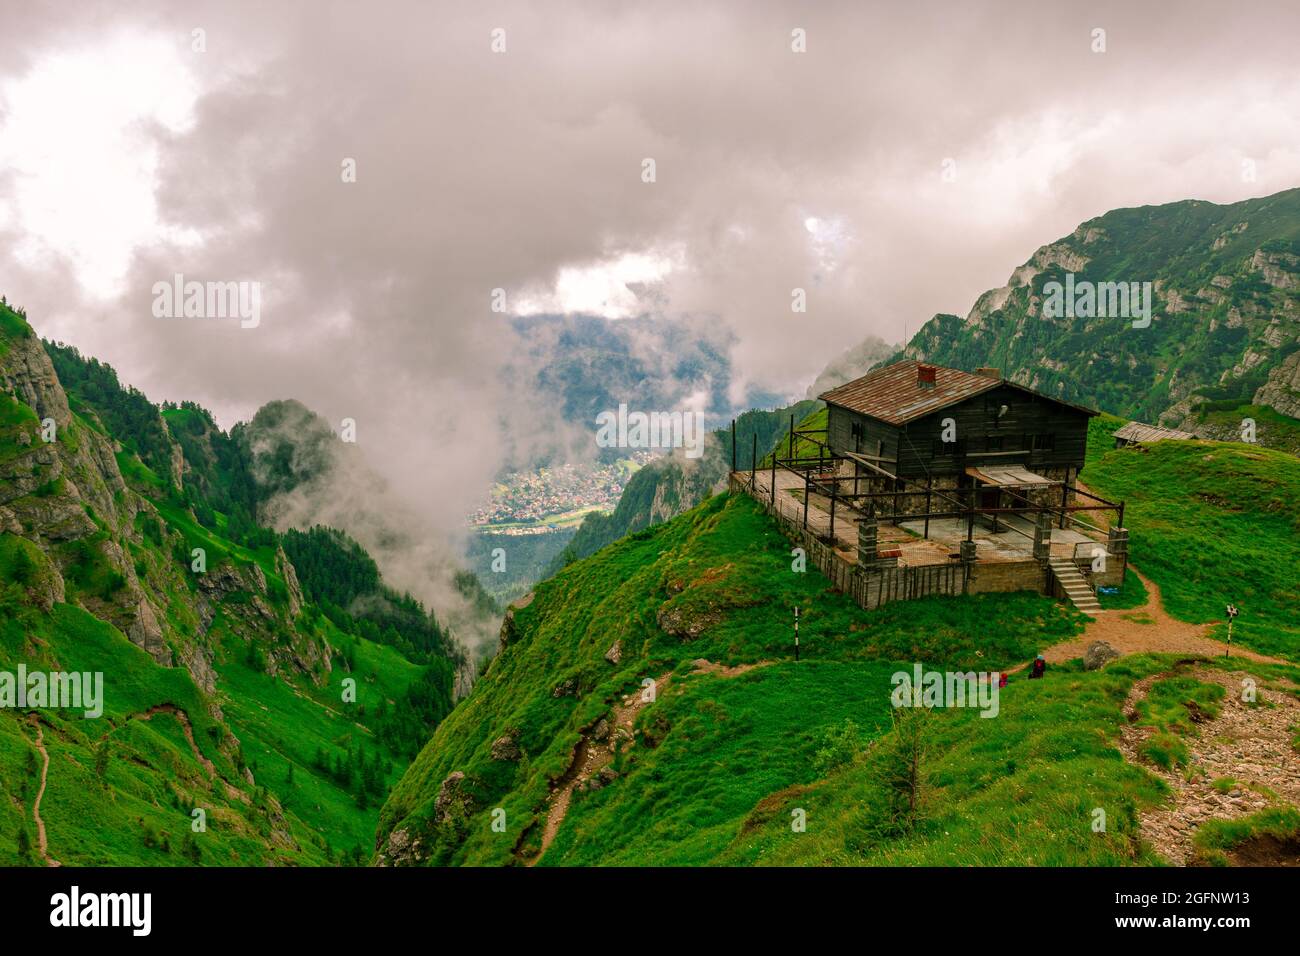 Landscape photography of the Caraiman mountain cabin, located in Bucegi  Mountains, Romania. Photo was taken from the front of the cabin Stock Photo  - Alamy